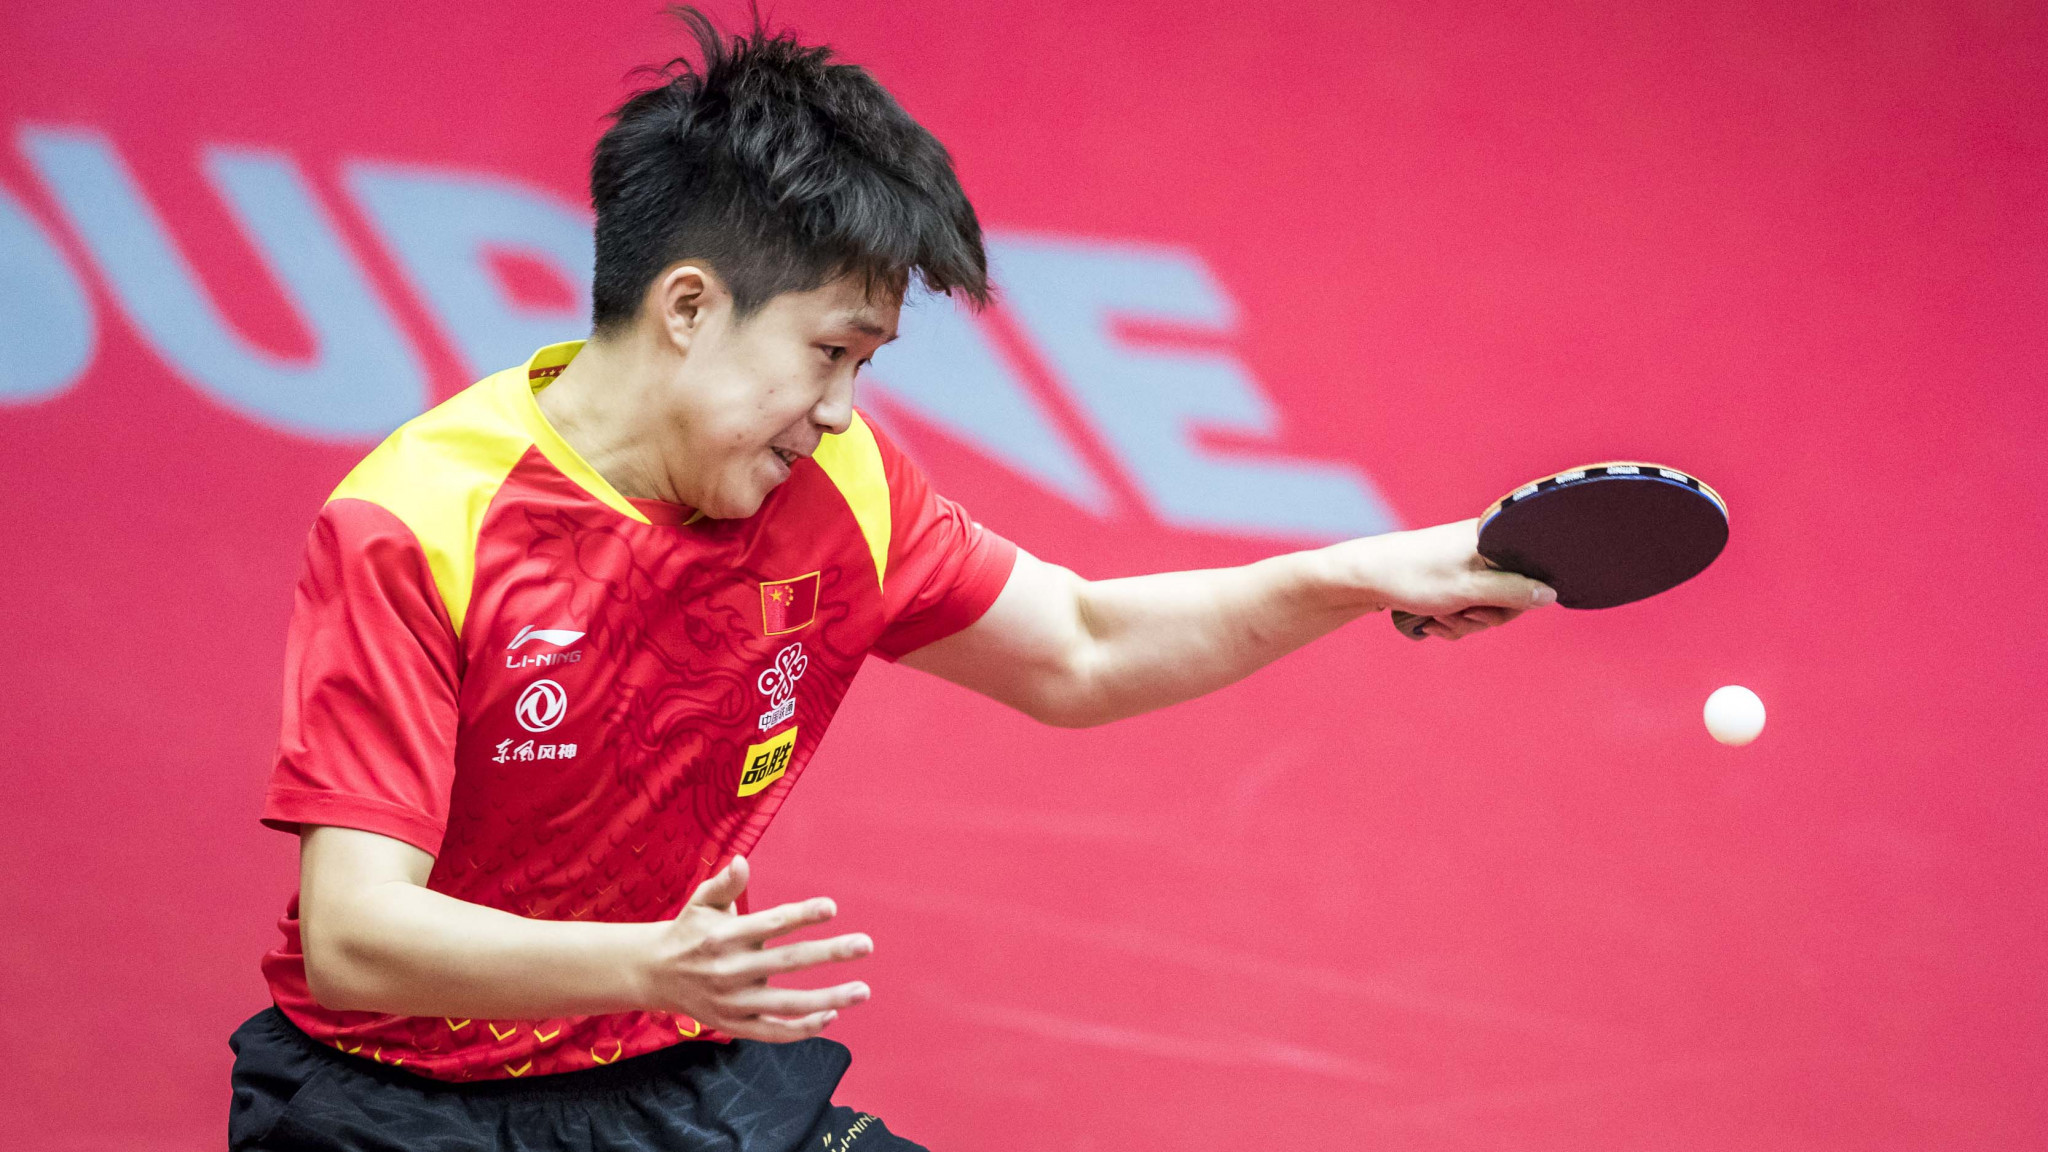 Chinese teenager Wang Chuqin continued his impressive run at the Australian Open in Geelong, reaching the semi-finals having started in qualifying ©ITTF